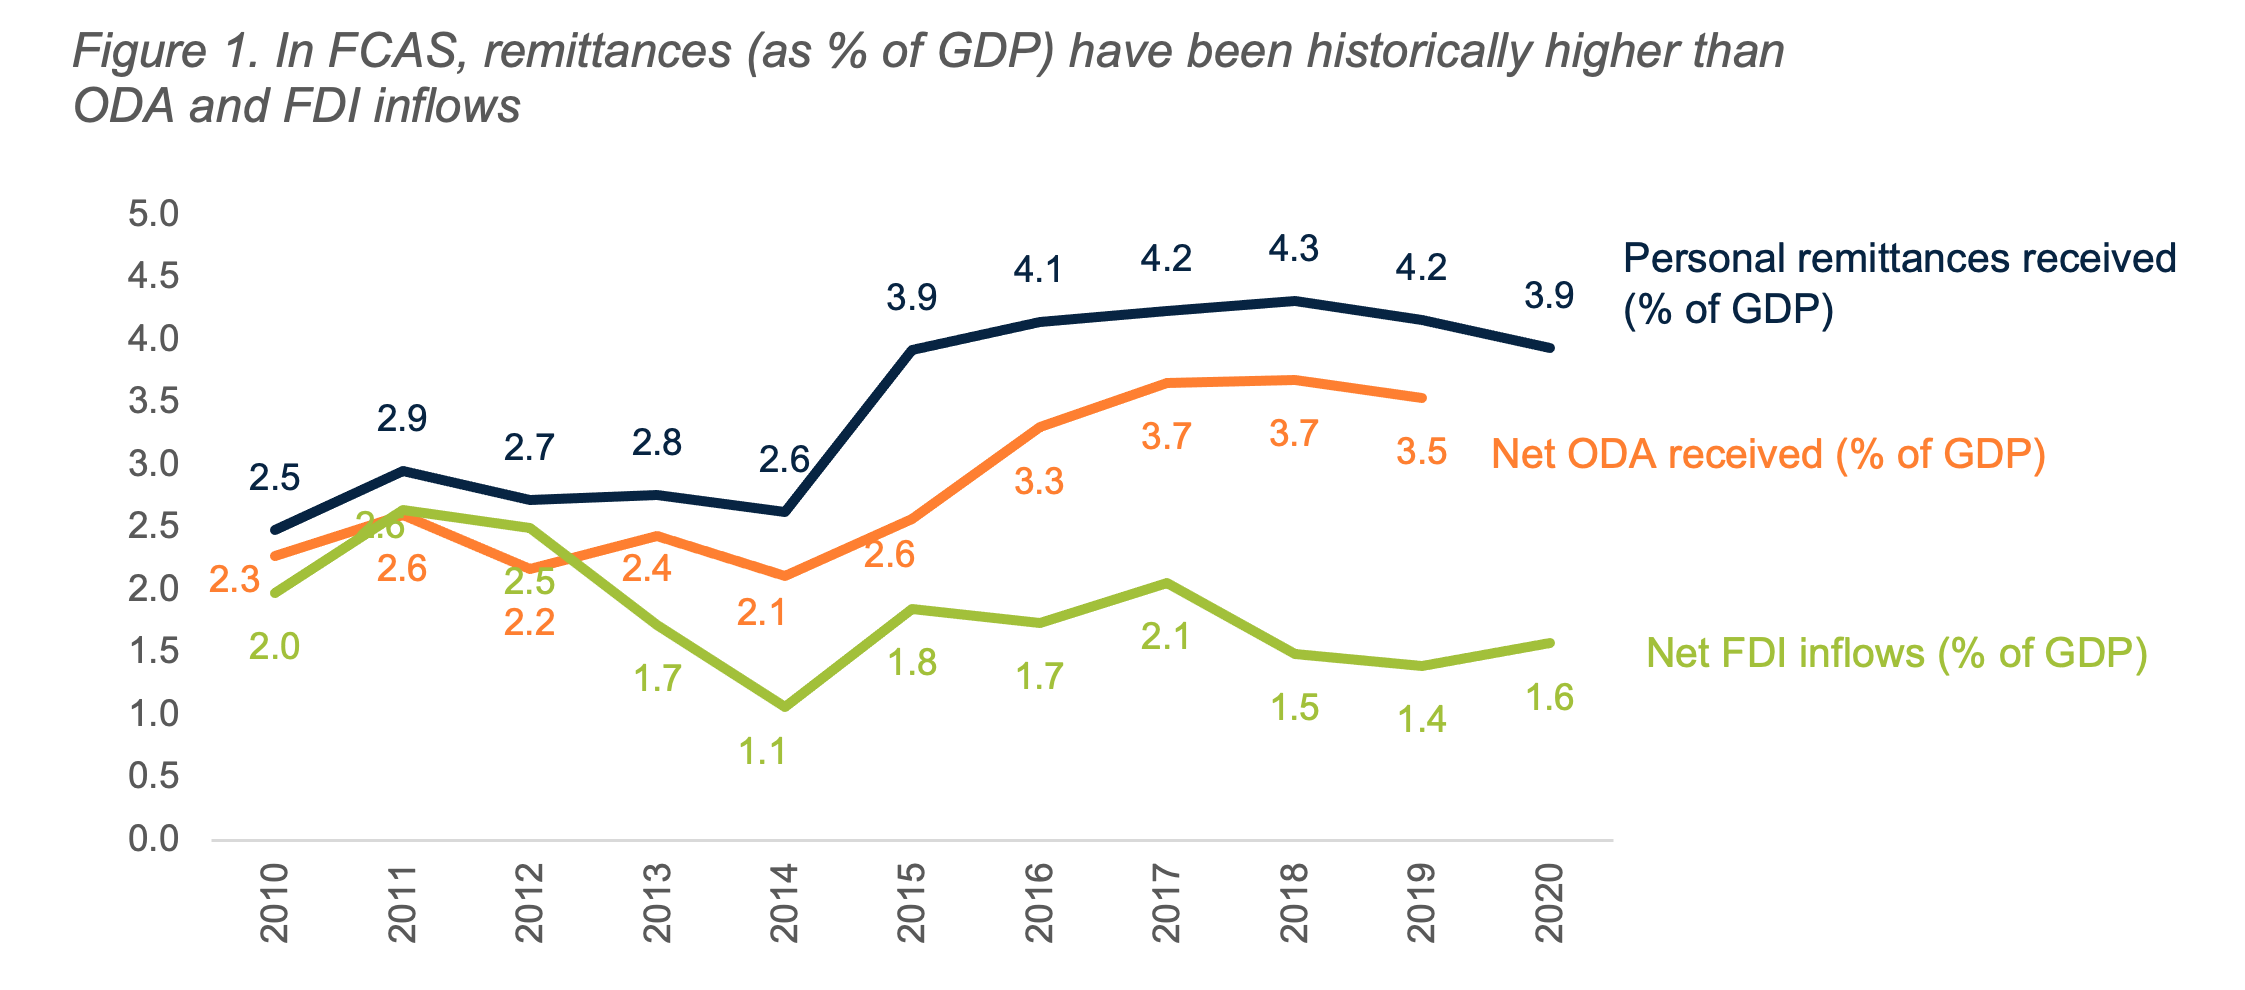 In FCAS, remittances (as % of GDP) have been historically higher than ODA and FDI inflows